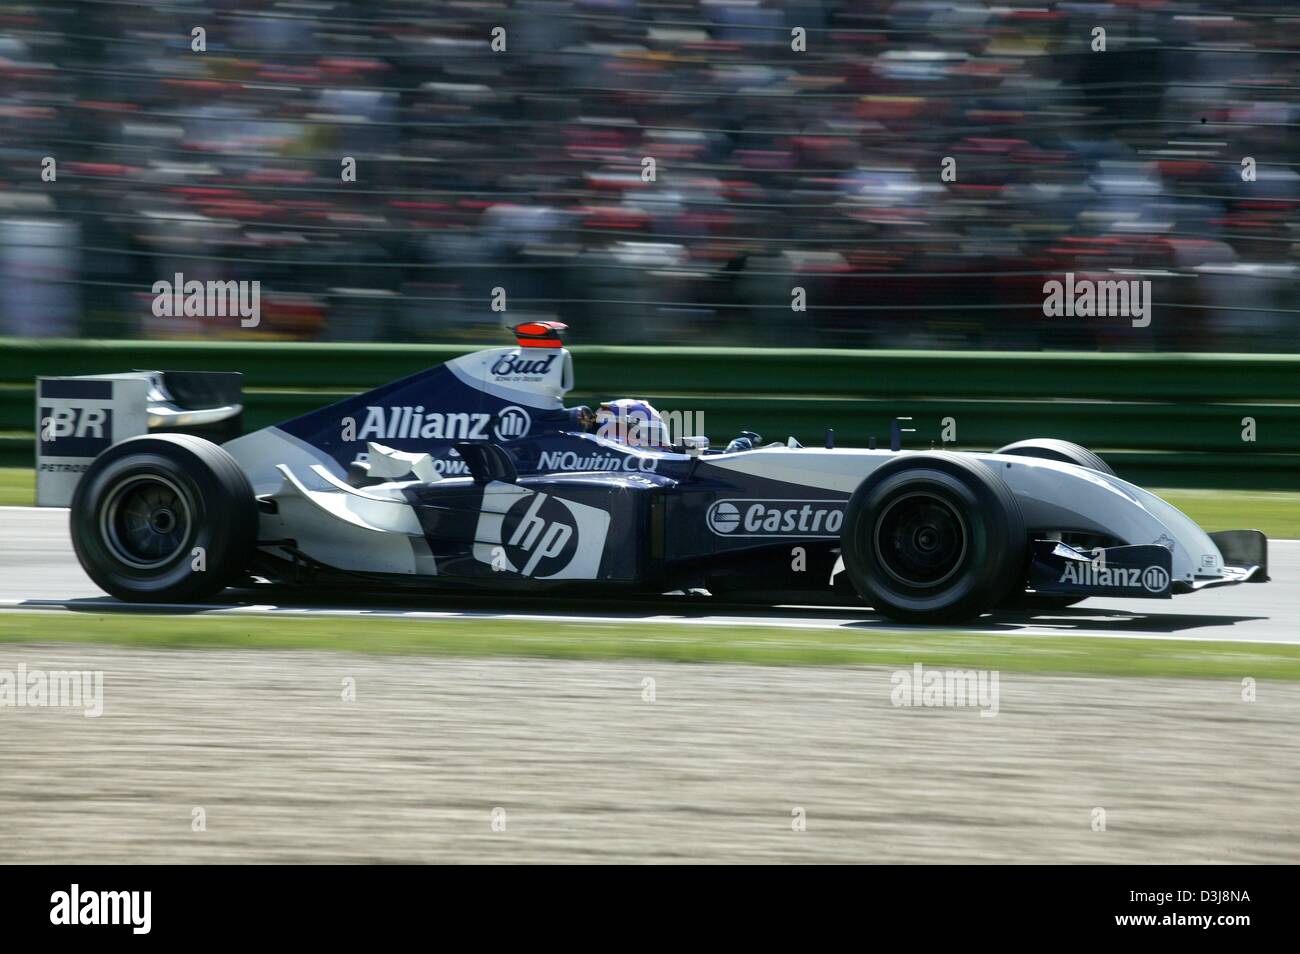 (dpa) - Colombian Formula One pilot Juan Pablo Montoya races during the 2004 San Marino Grand Prix in Imola, Italy, 25 April 2004. Montoya (Team BMW-Williams) finished in third place. Stock Photo